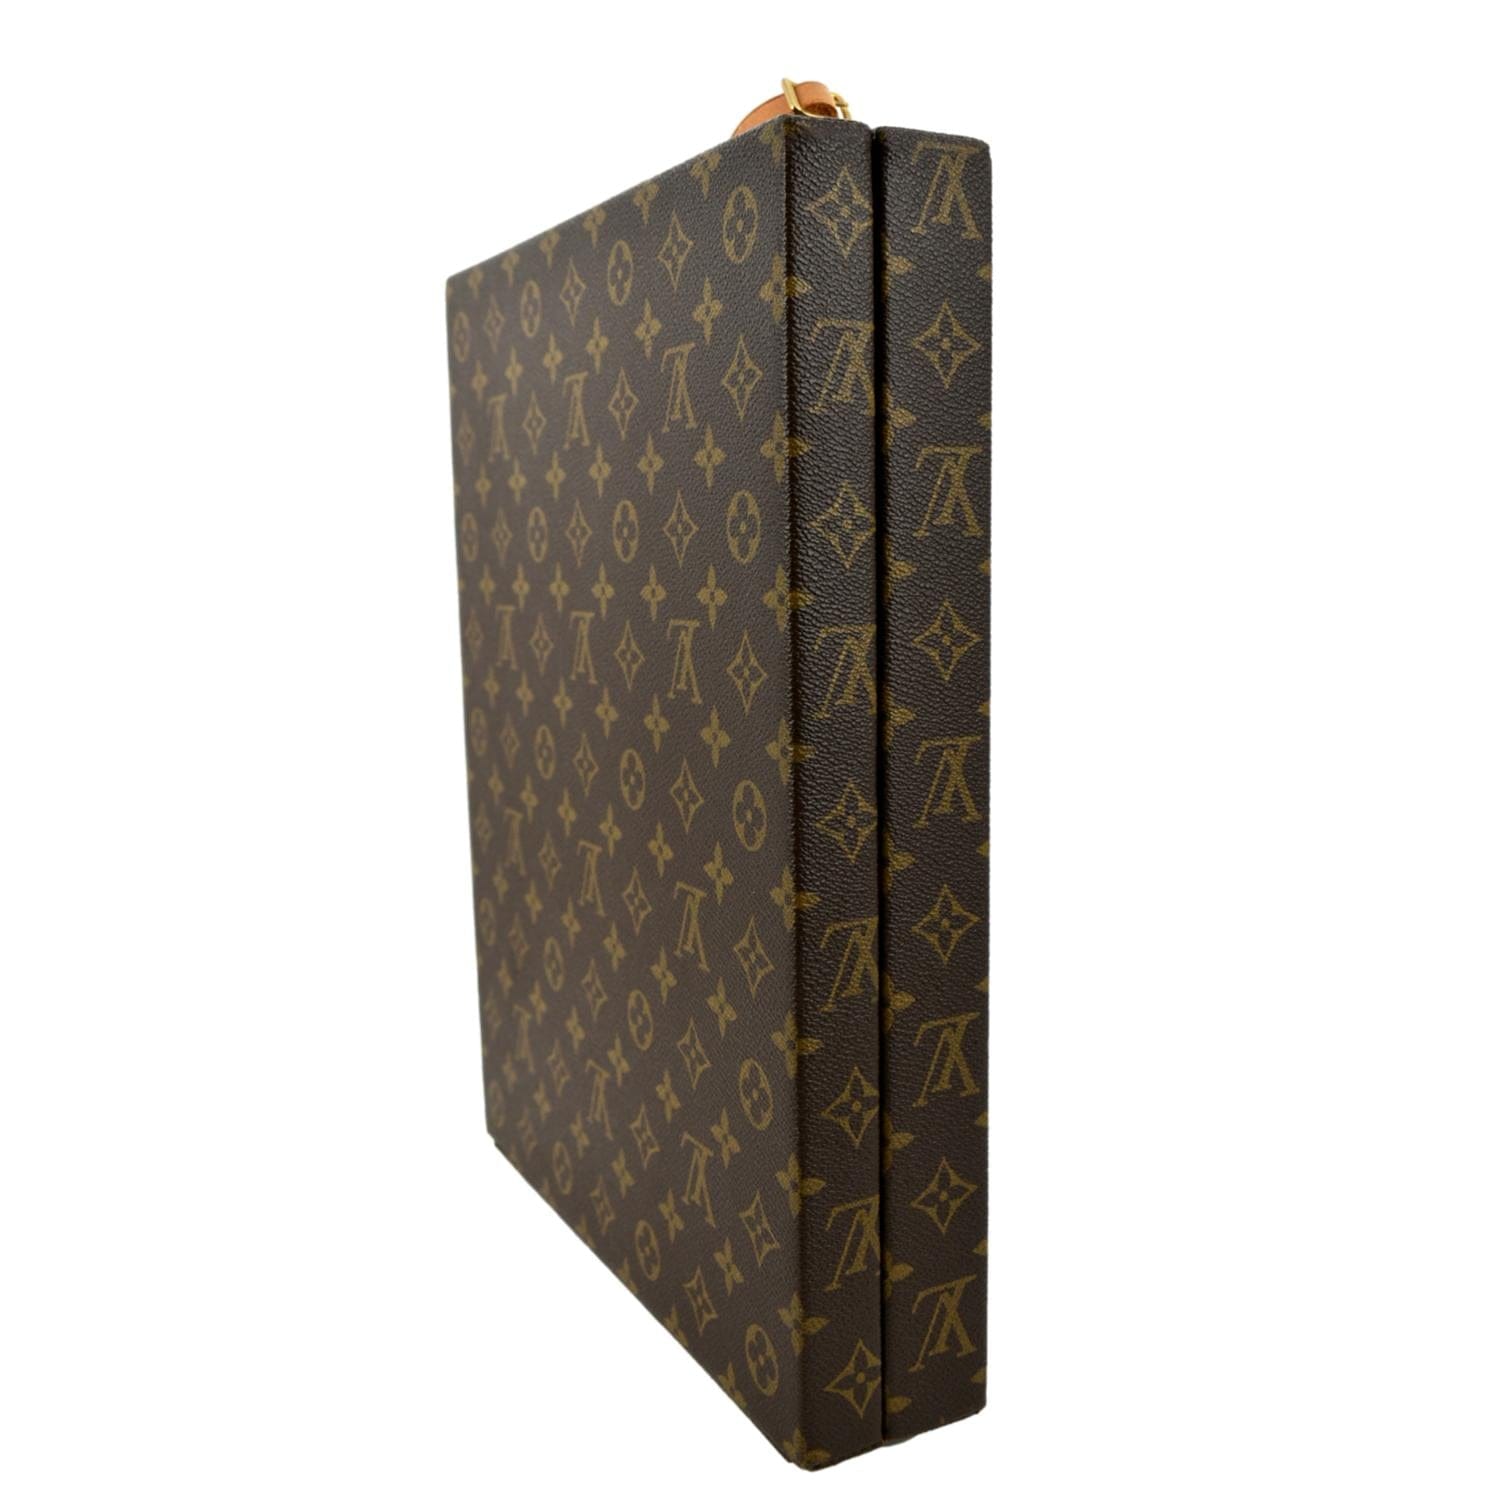 Louis Vuitton Designer iPad Cases in Time for Holidays